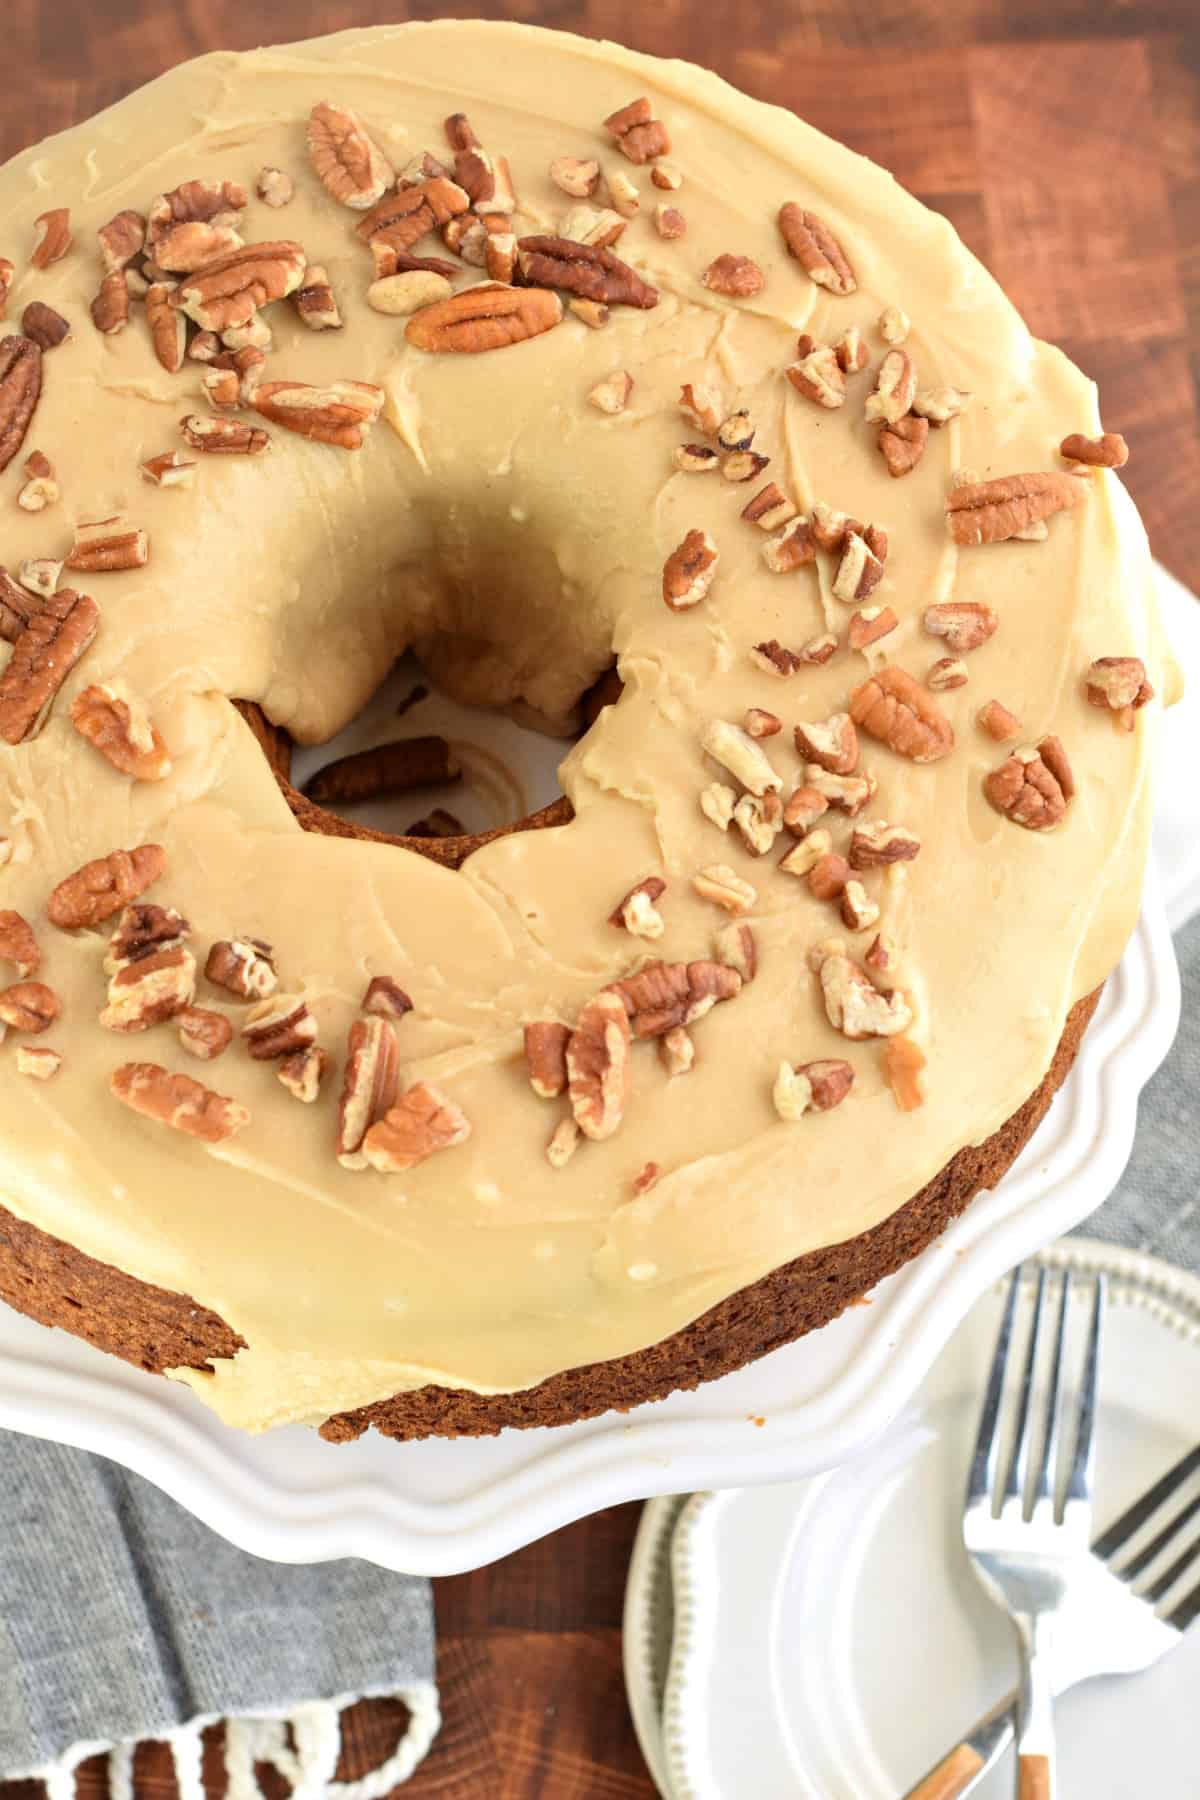 Brown Sugar Pound Cake topped with caramel glaze and pecans on a white cake platter.